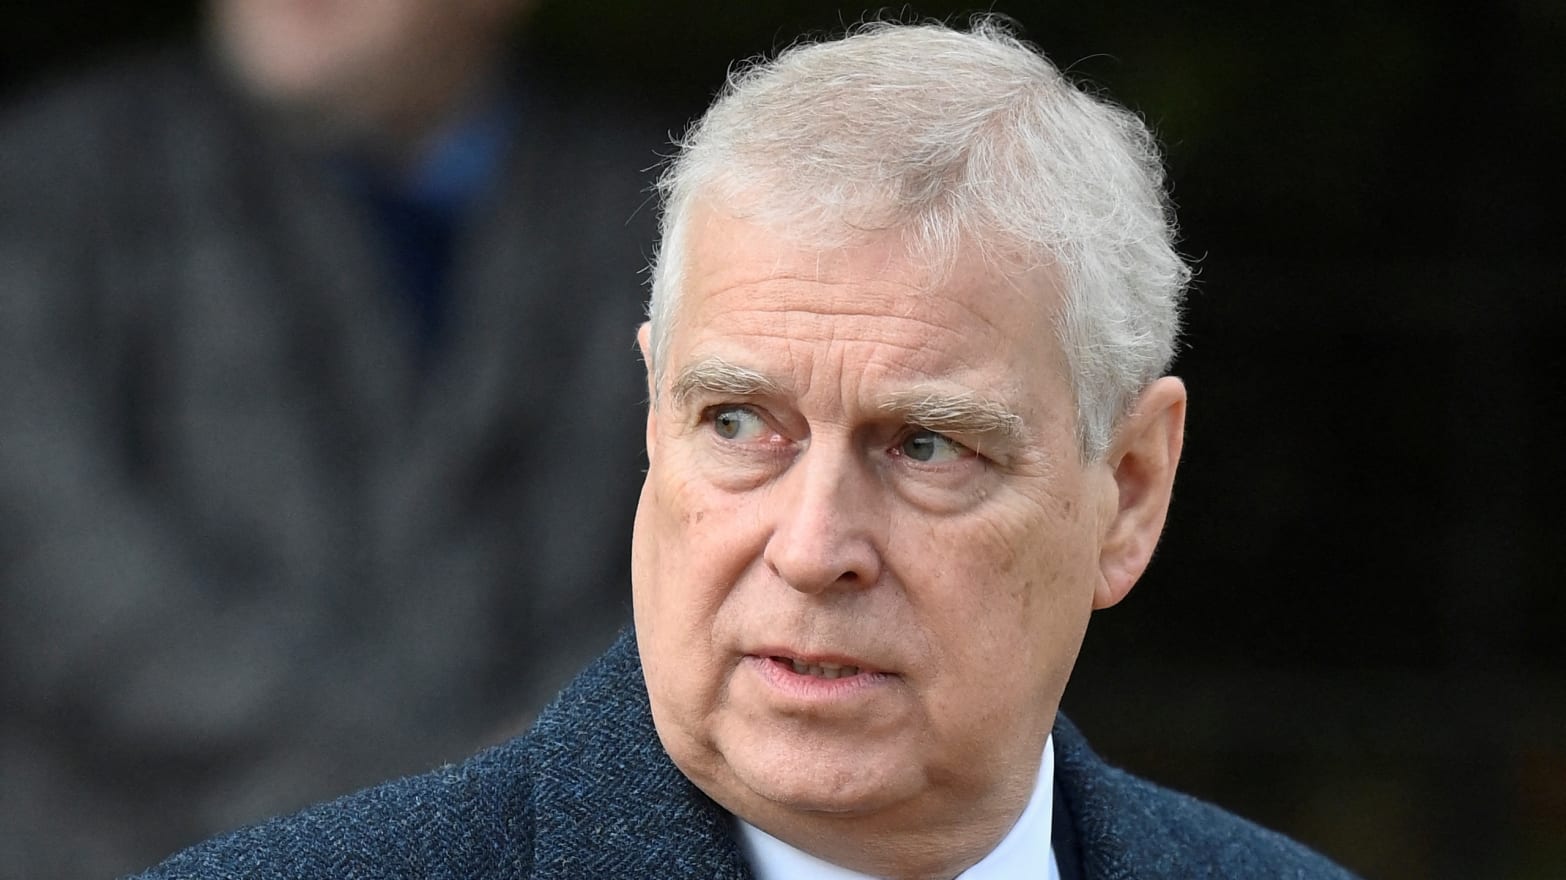 Prince Andrew in a gray coat and purple tie.